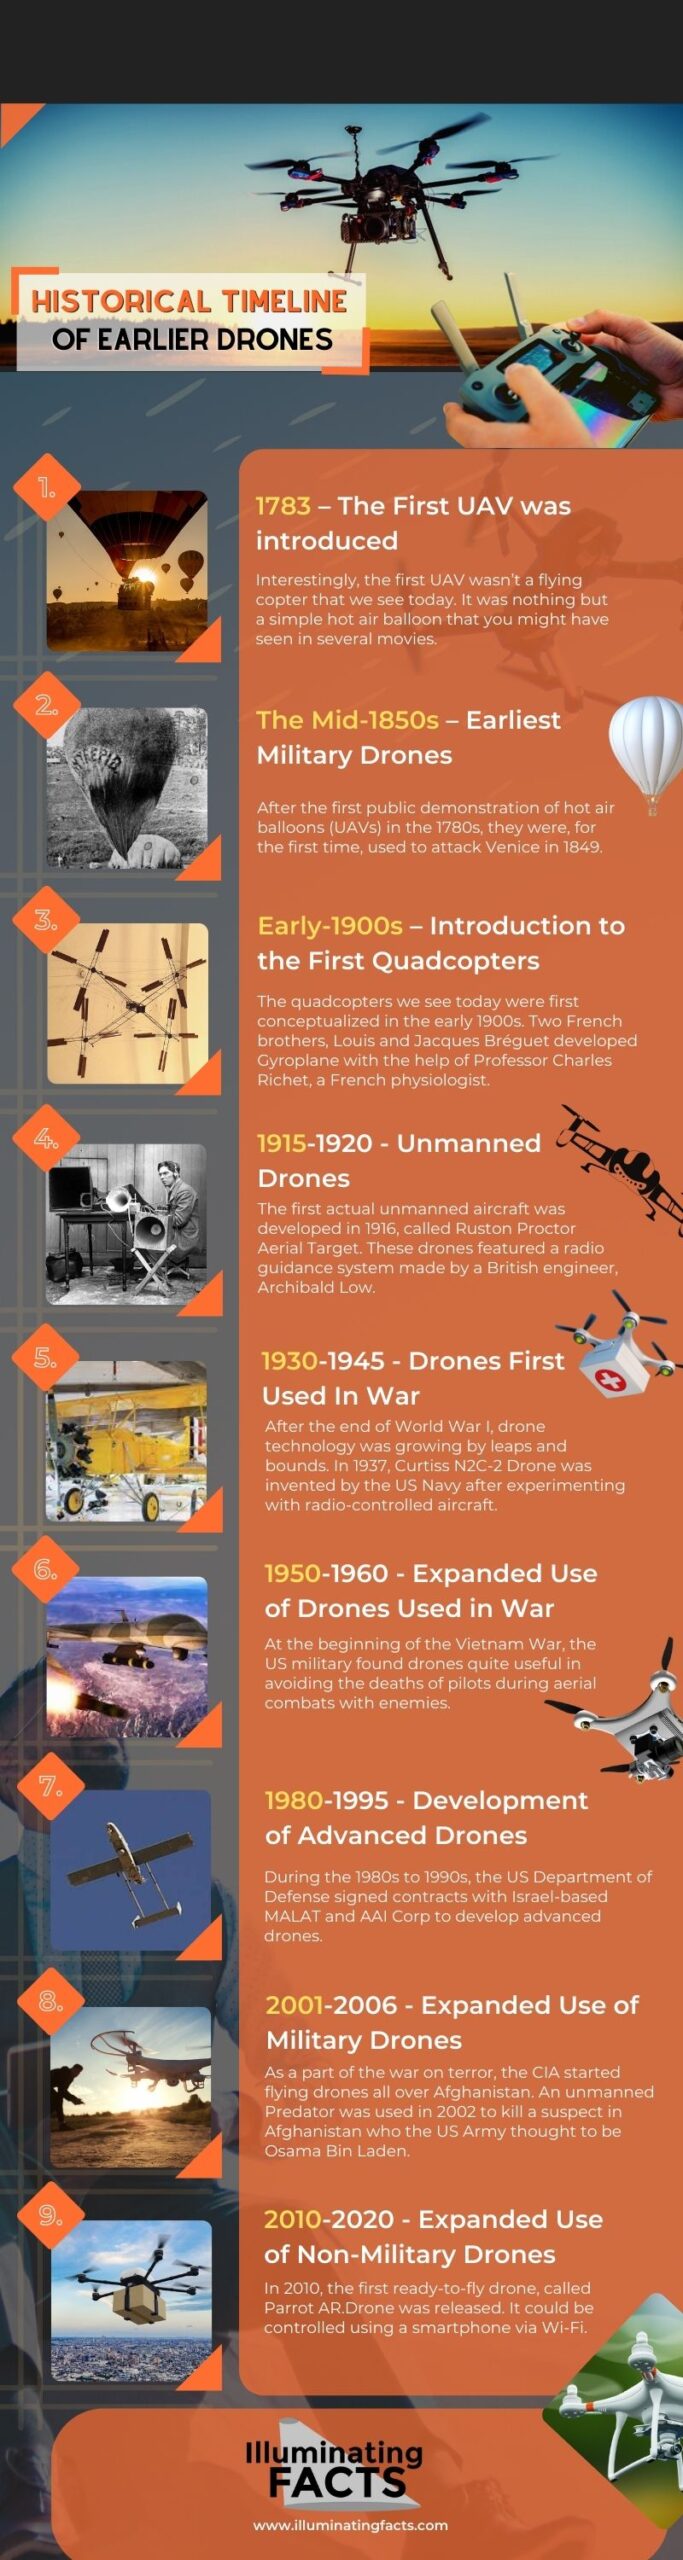 Historical Timeline of Earlier Drones Infographic